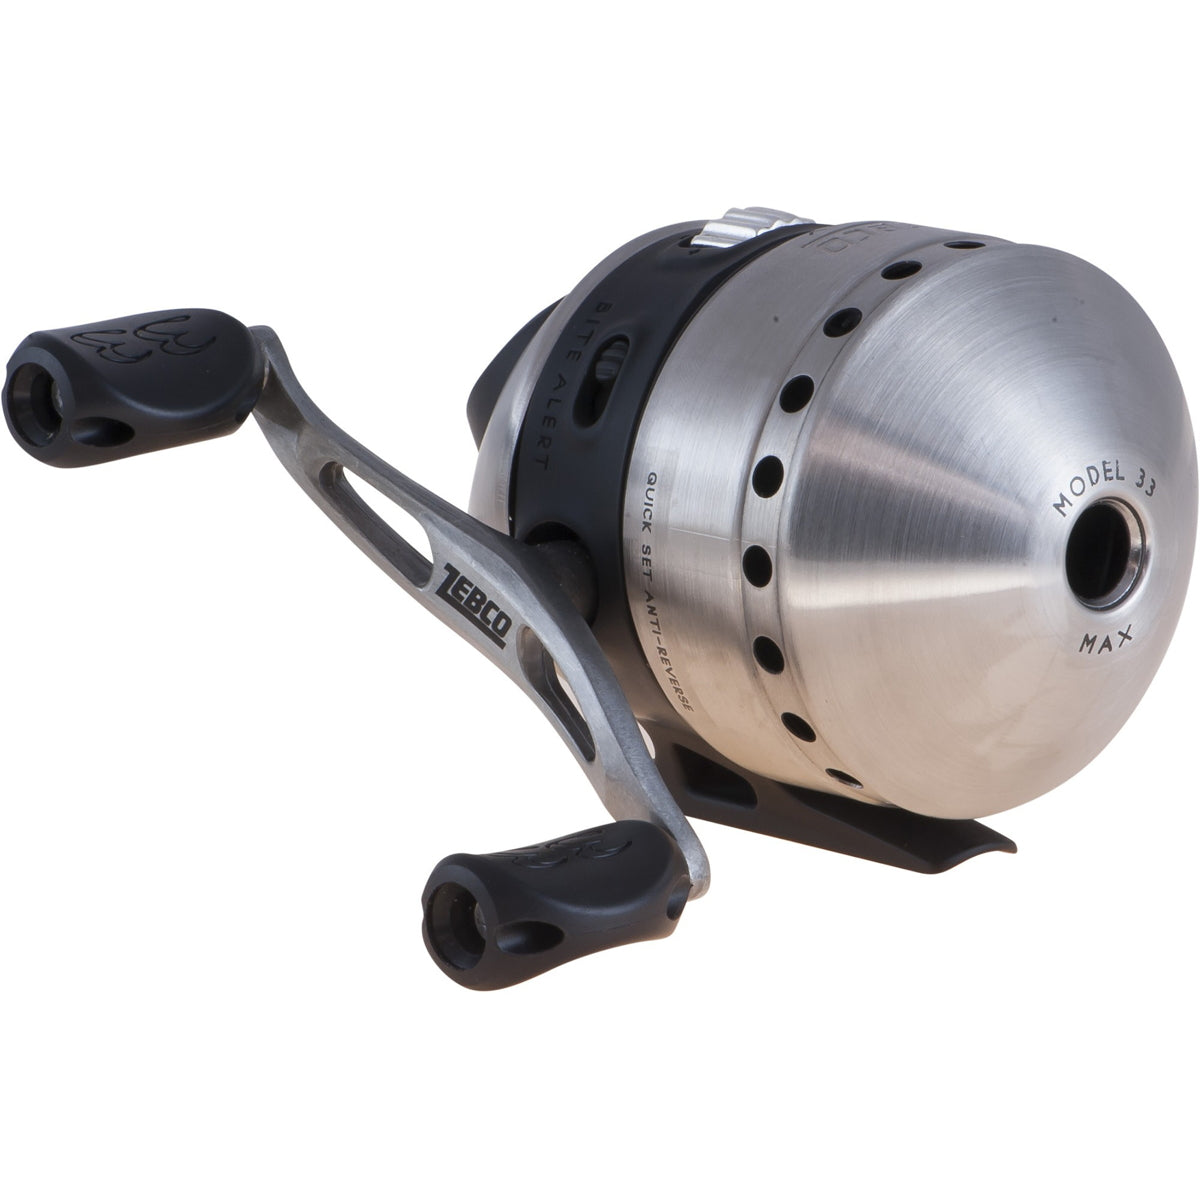 Photo of Zebco 33 MAX Spincast Reel for sale at United Tackle Shops.